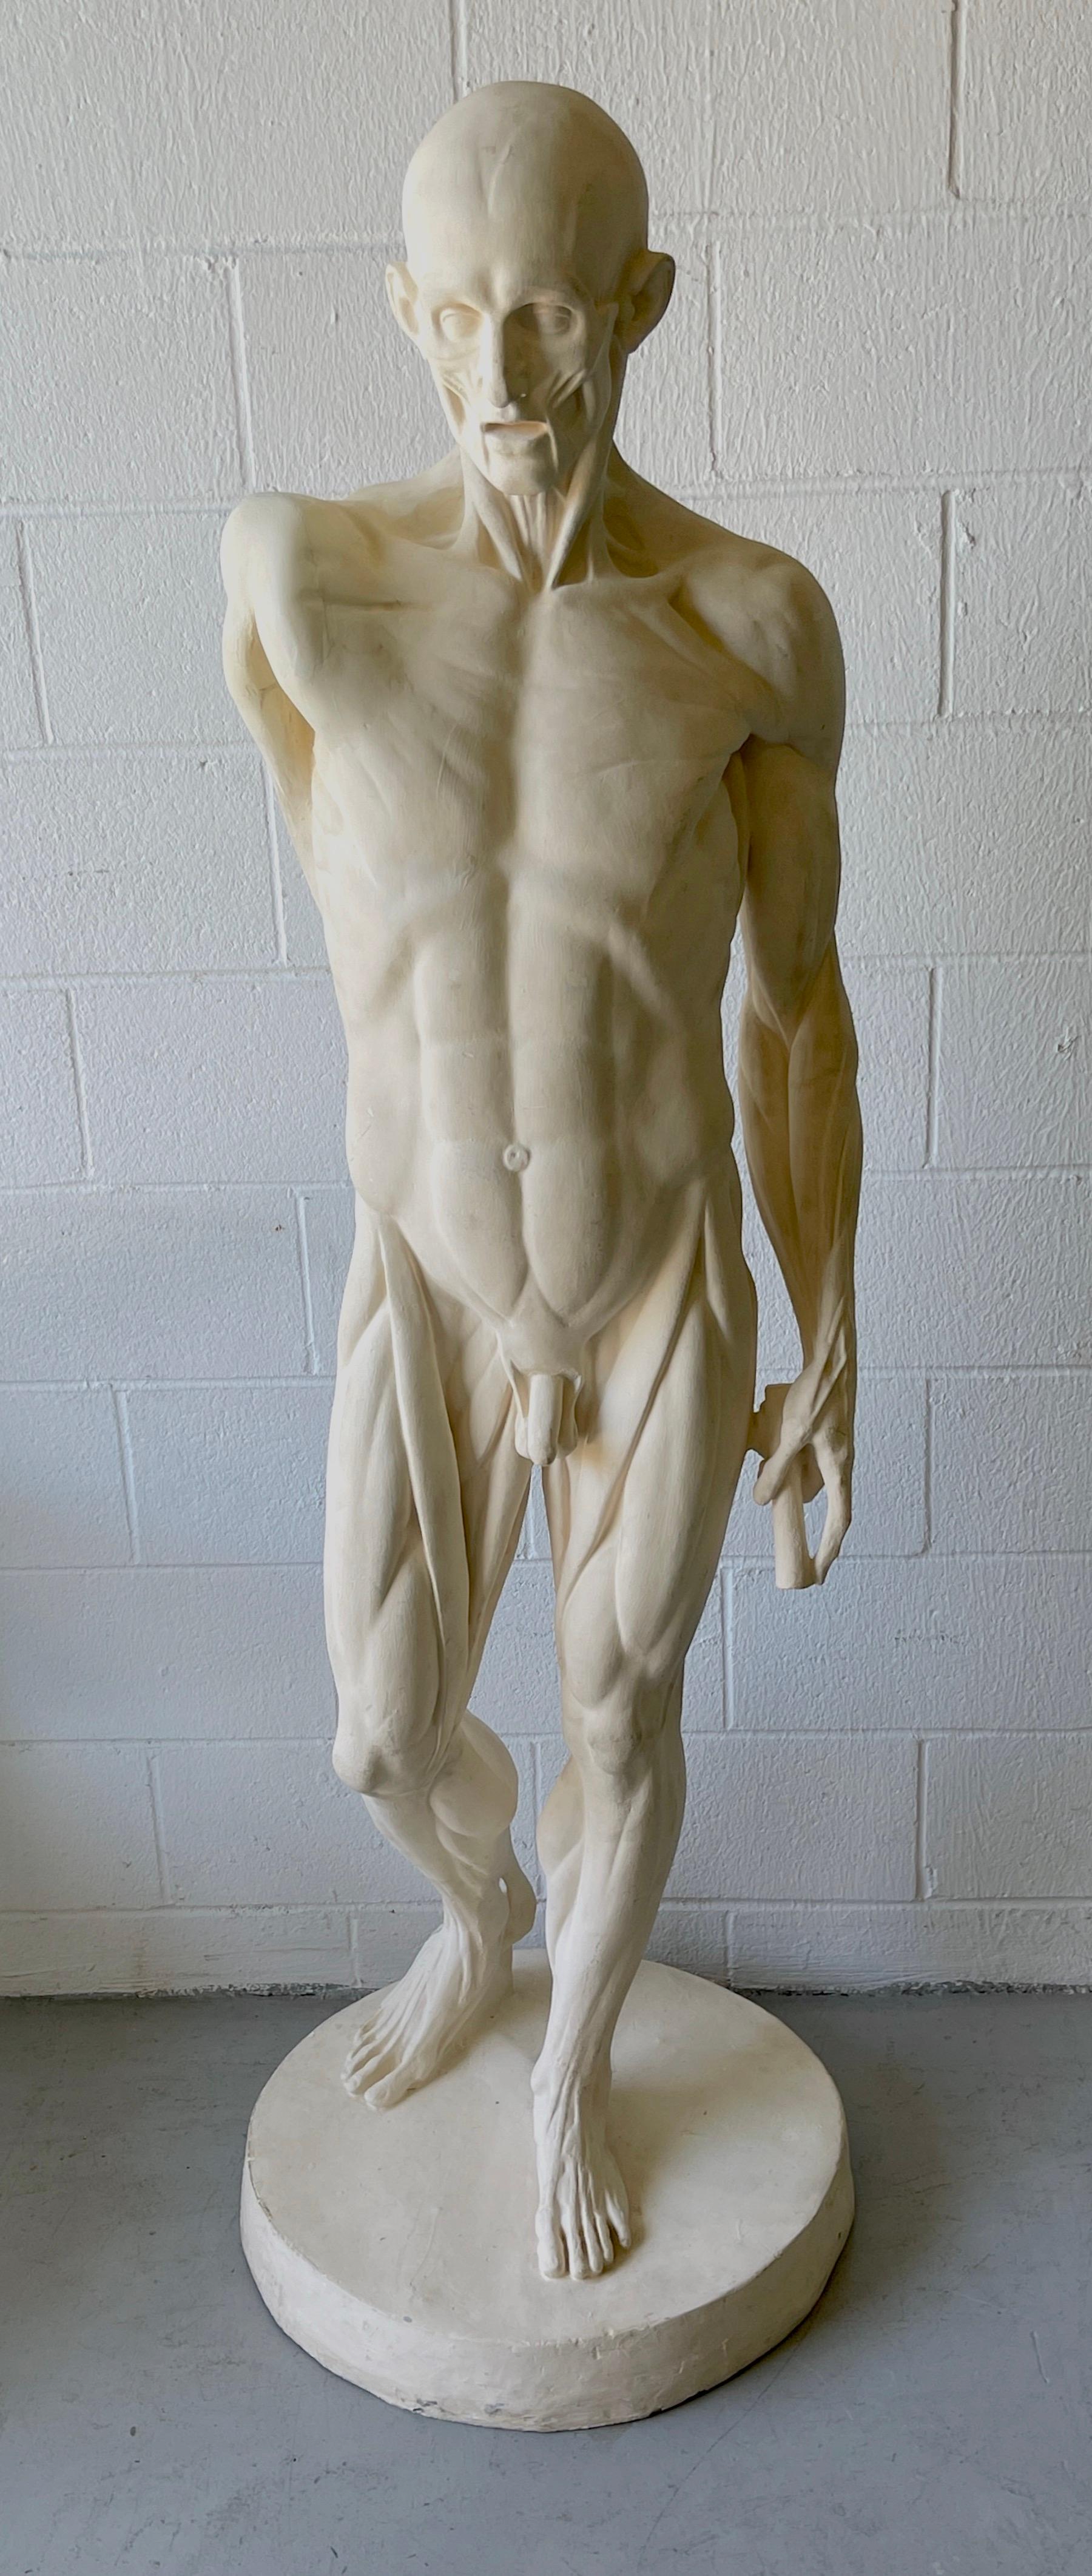 Life Size Anatomical Study of Flayed Male L'ecorche after Jean-Antoine Houdon
USA, 20th century, Variant of 'Anatomical Man No. 3' 
This work we are offering is a variant, without the outstretched arm. 
This work is a hollow composition casting,